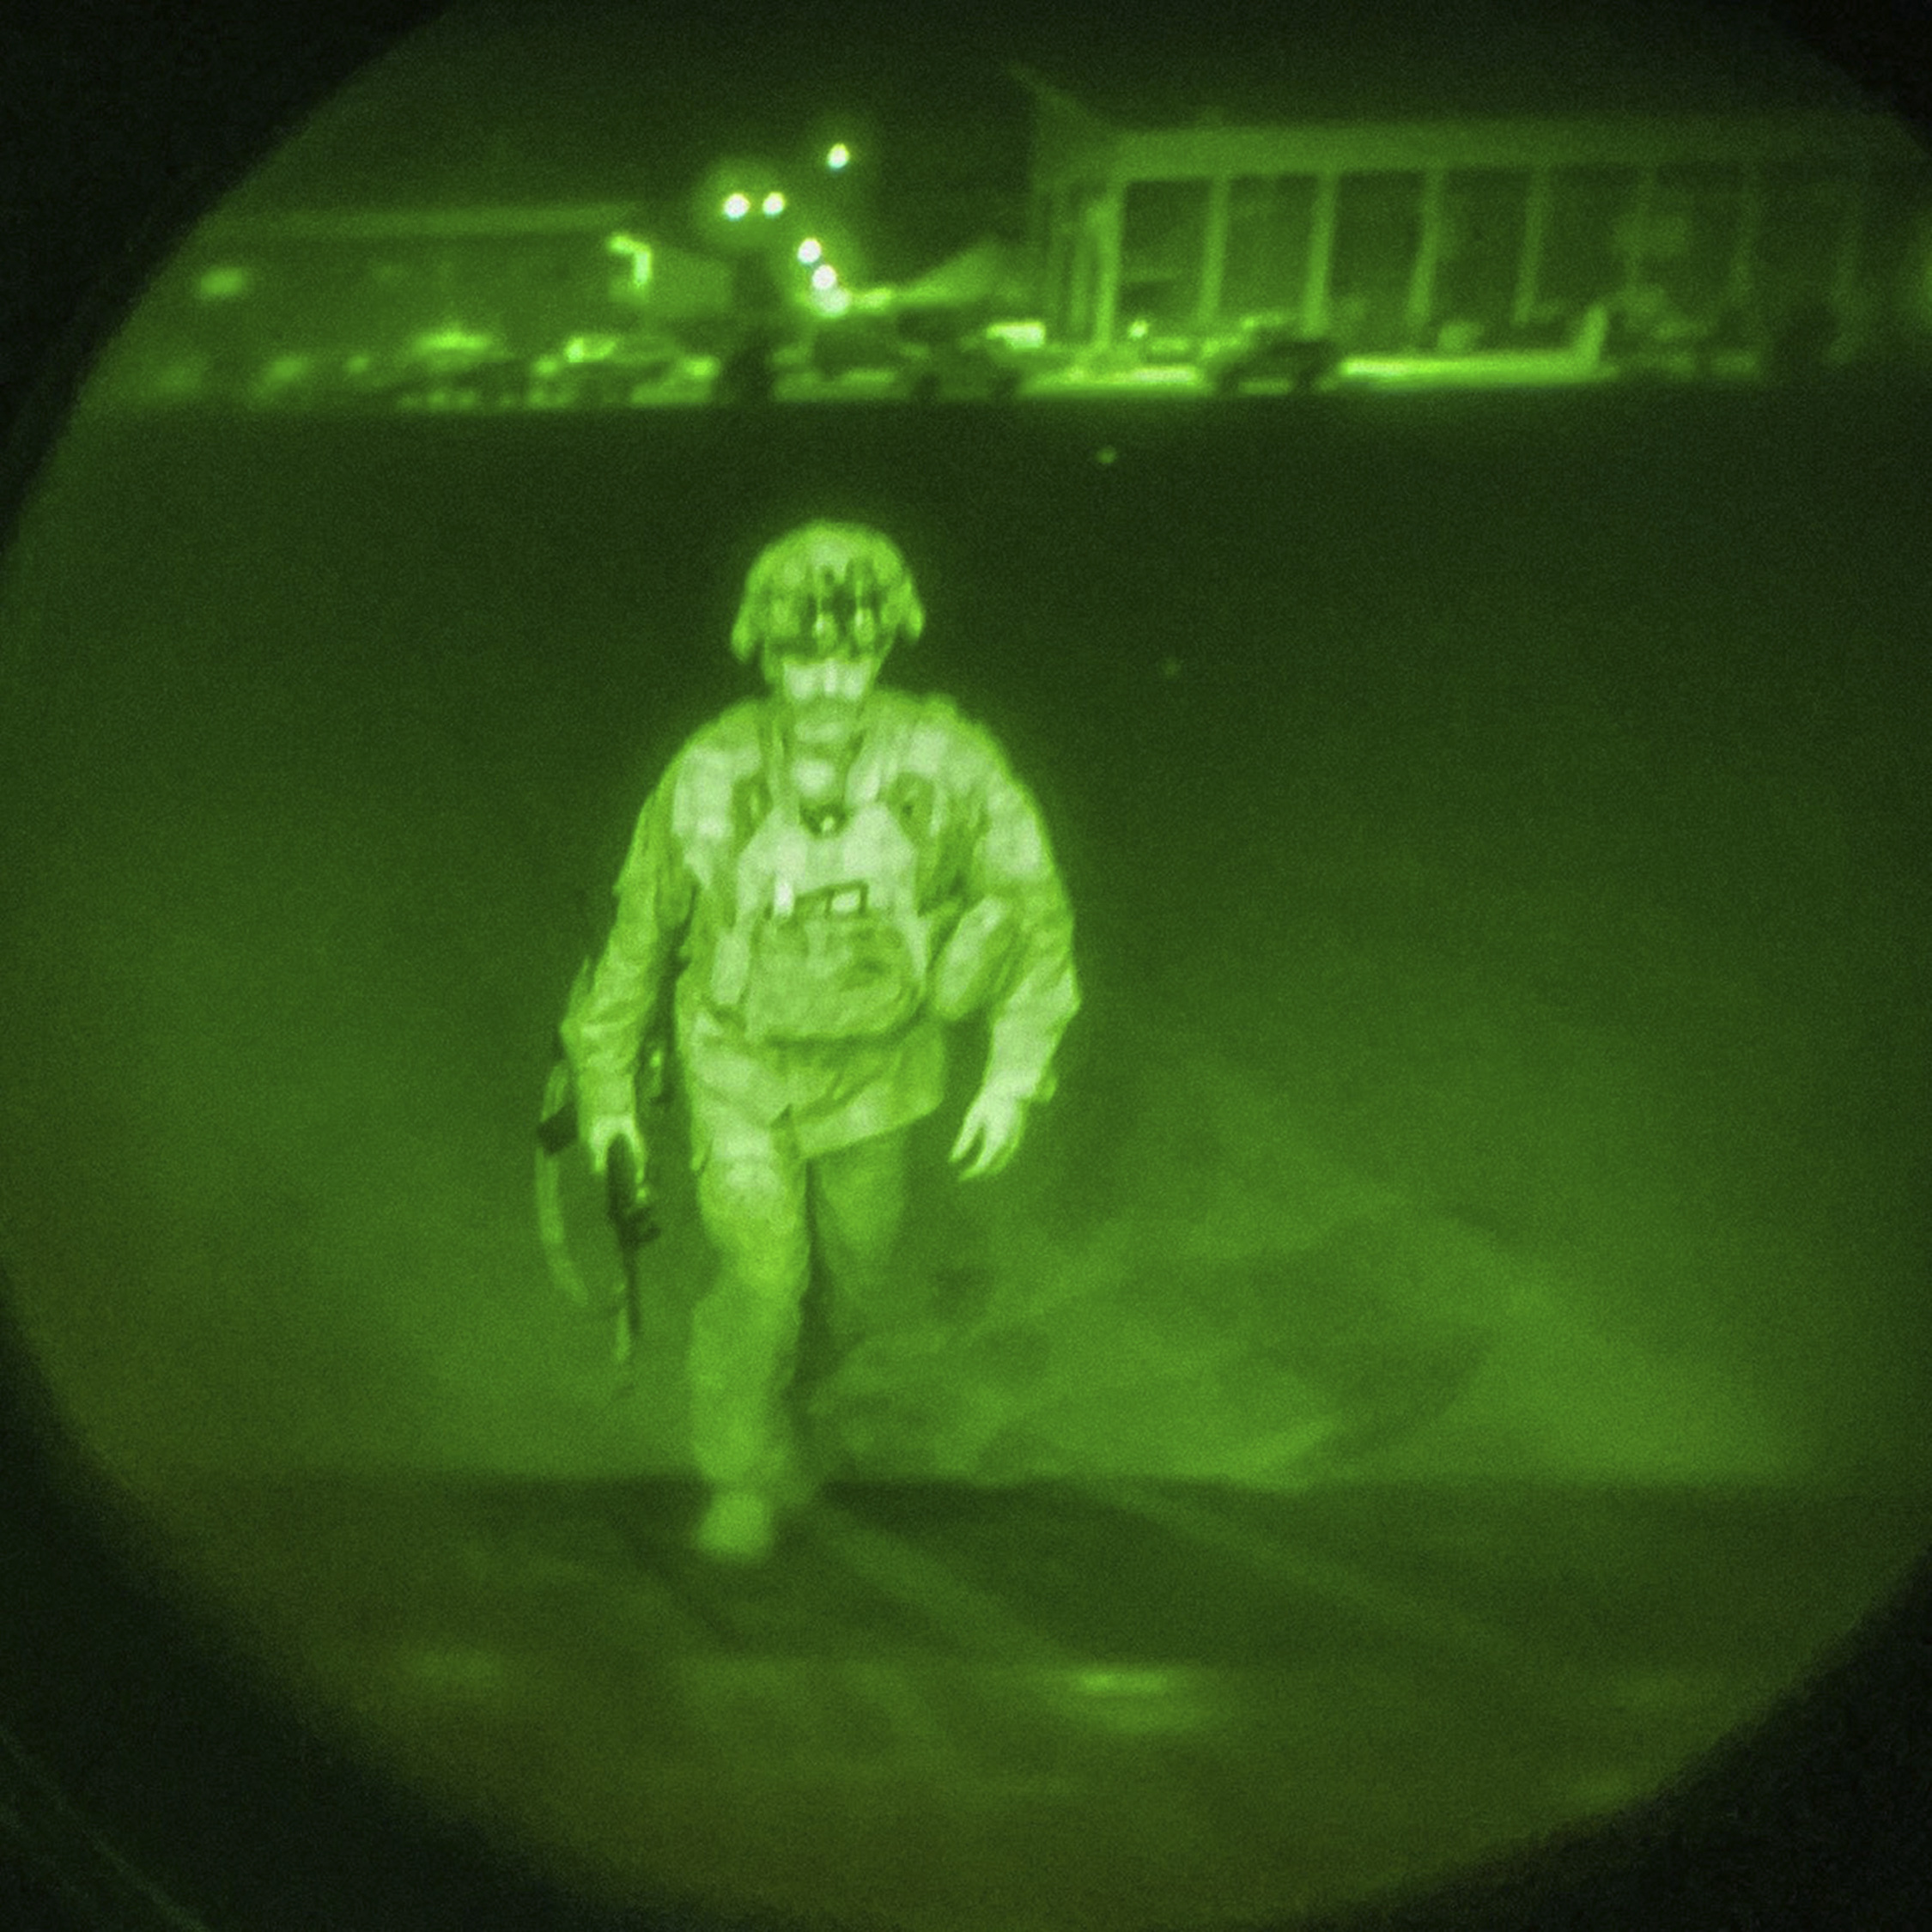 A night vision picture of Major General Chris Donahue, commander of the US Army 82nd Airborne Division, XVIII Airborne Corps, boards a C-17 cargo plane at Hamid Karzai International Airport in Kabul as the final American service member to depart Afghanistan (US Central Command via AP)